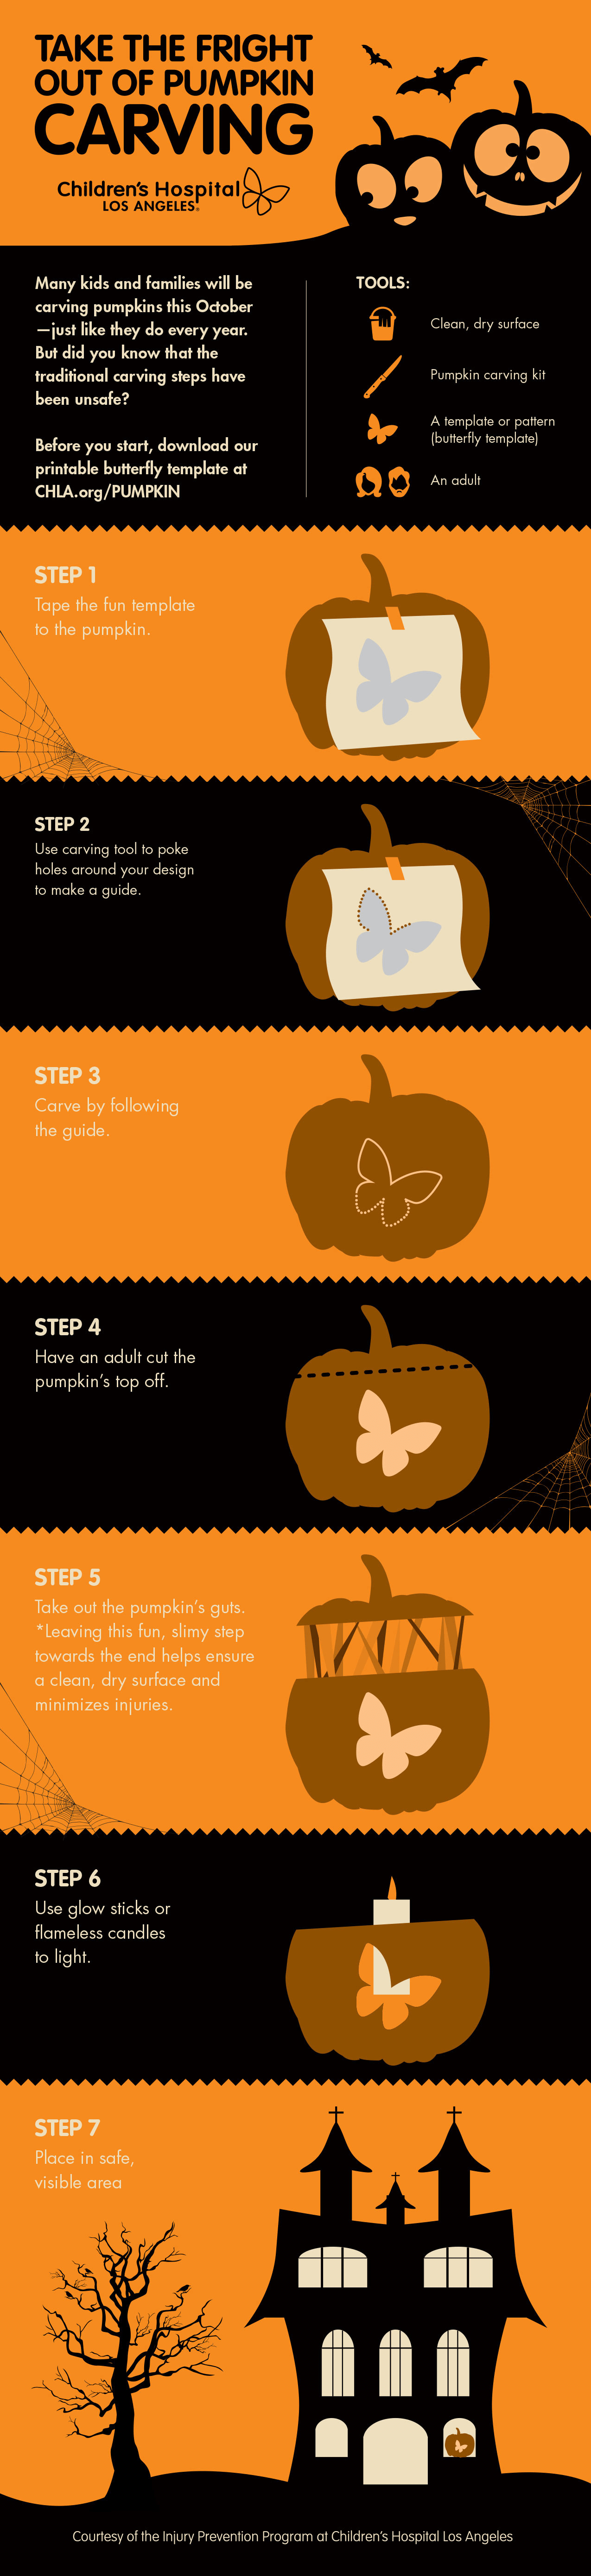 CHLA_PUMPKINCARVING_INFOGRAPHIC-v2.png